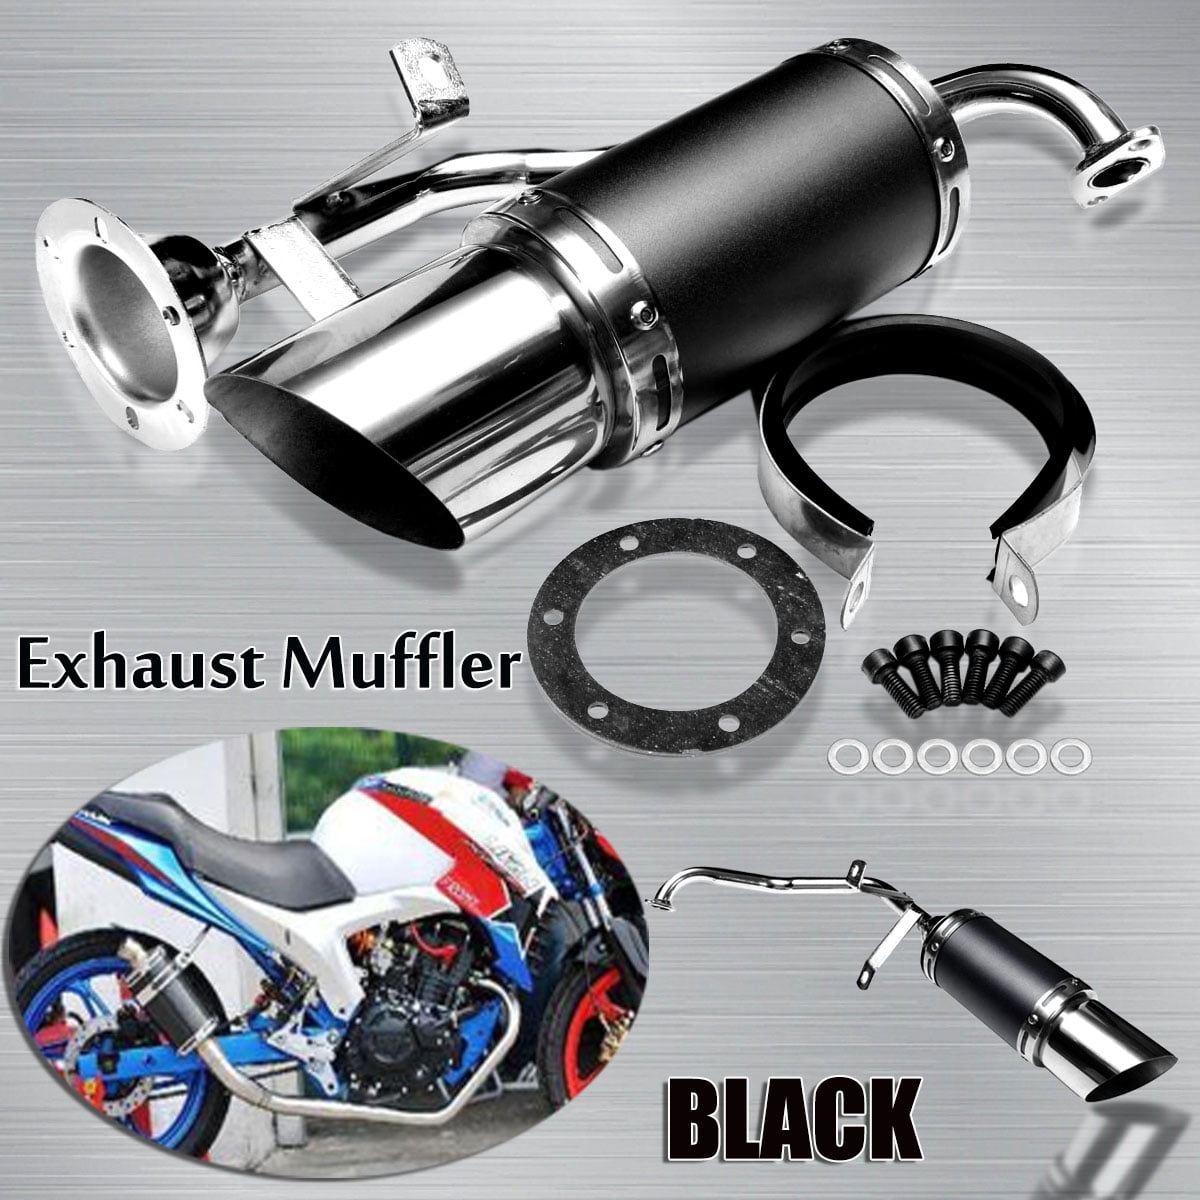 BYS Technology Exhaust System Steel Black Kit for GY6 150cc Chinese Scooter Black 